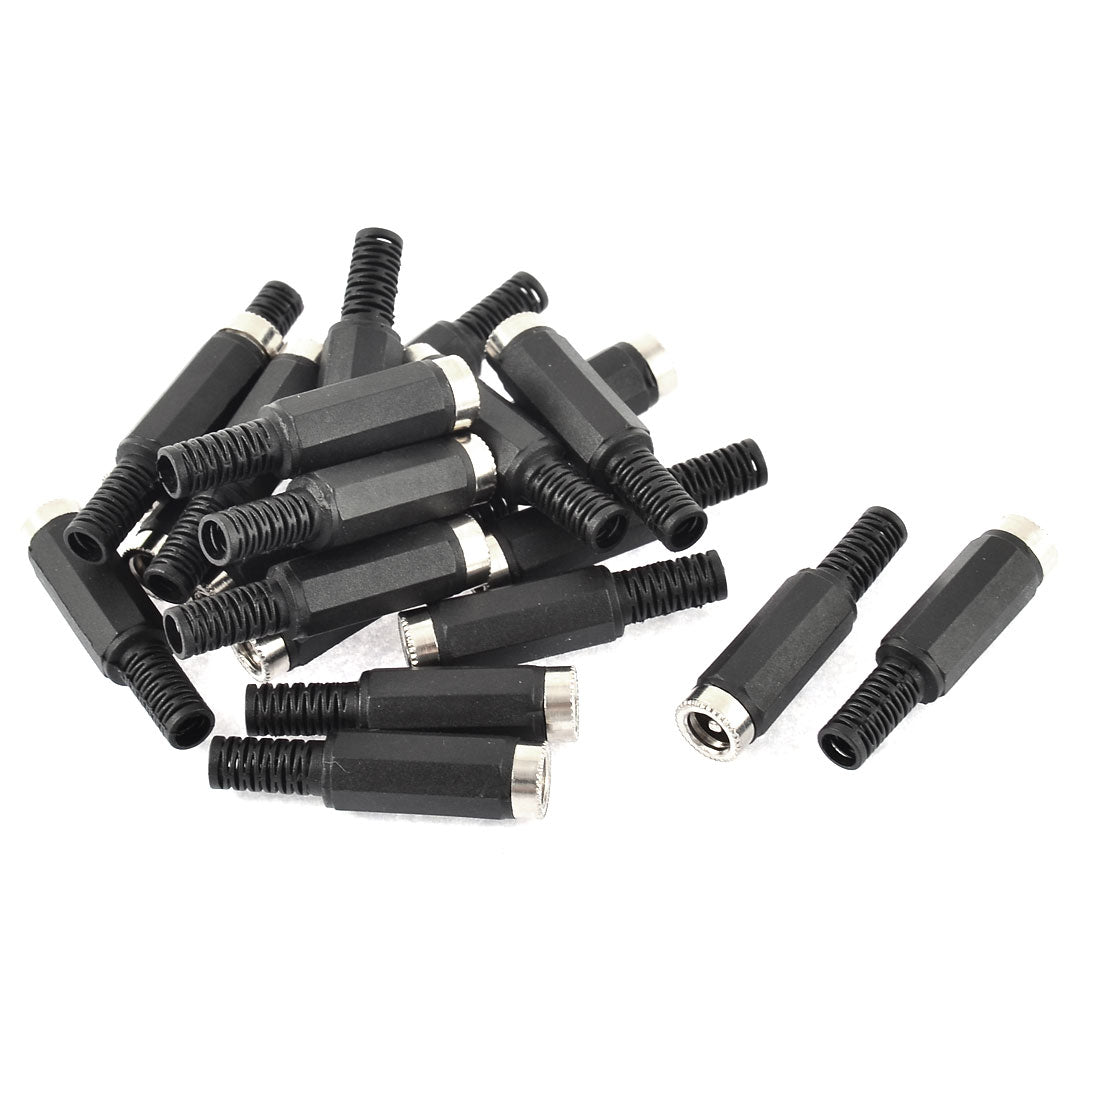 Uxcell Uxcell 20pcs 5.5mm x 2.1mm Plastic Female DC Power Inline Jack Socket Converter Adapter